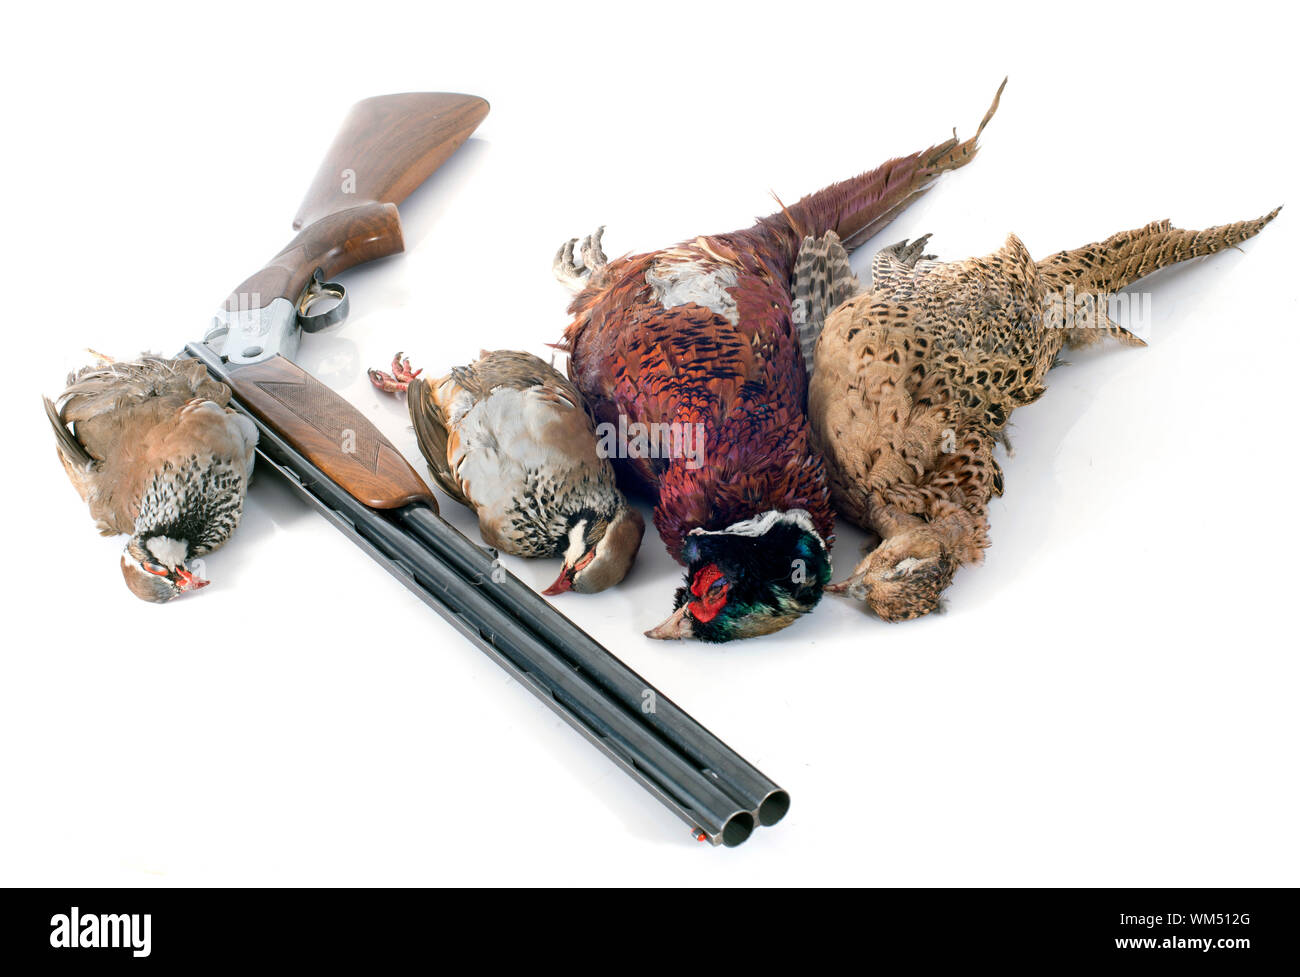 hunting games in front of white background Stock Photo